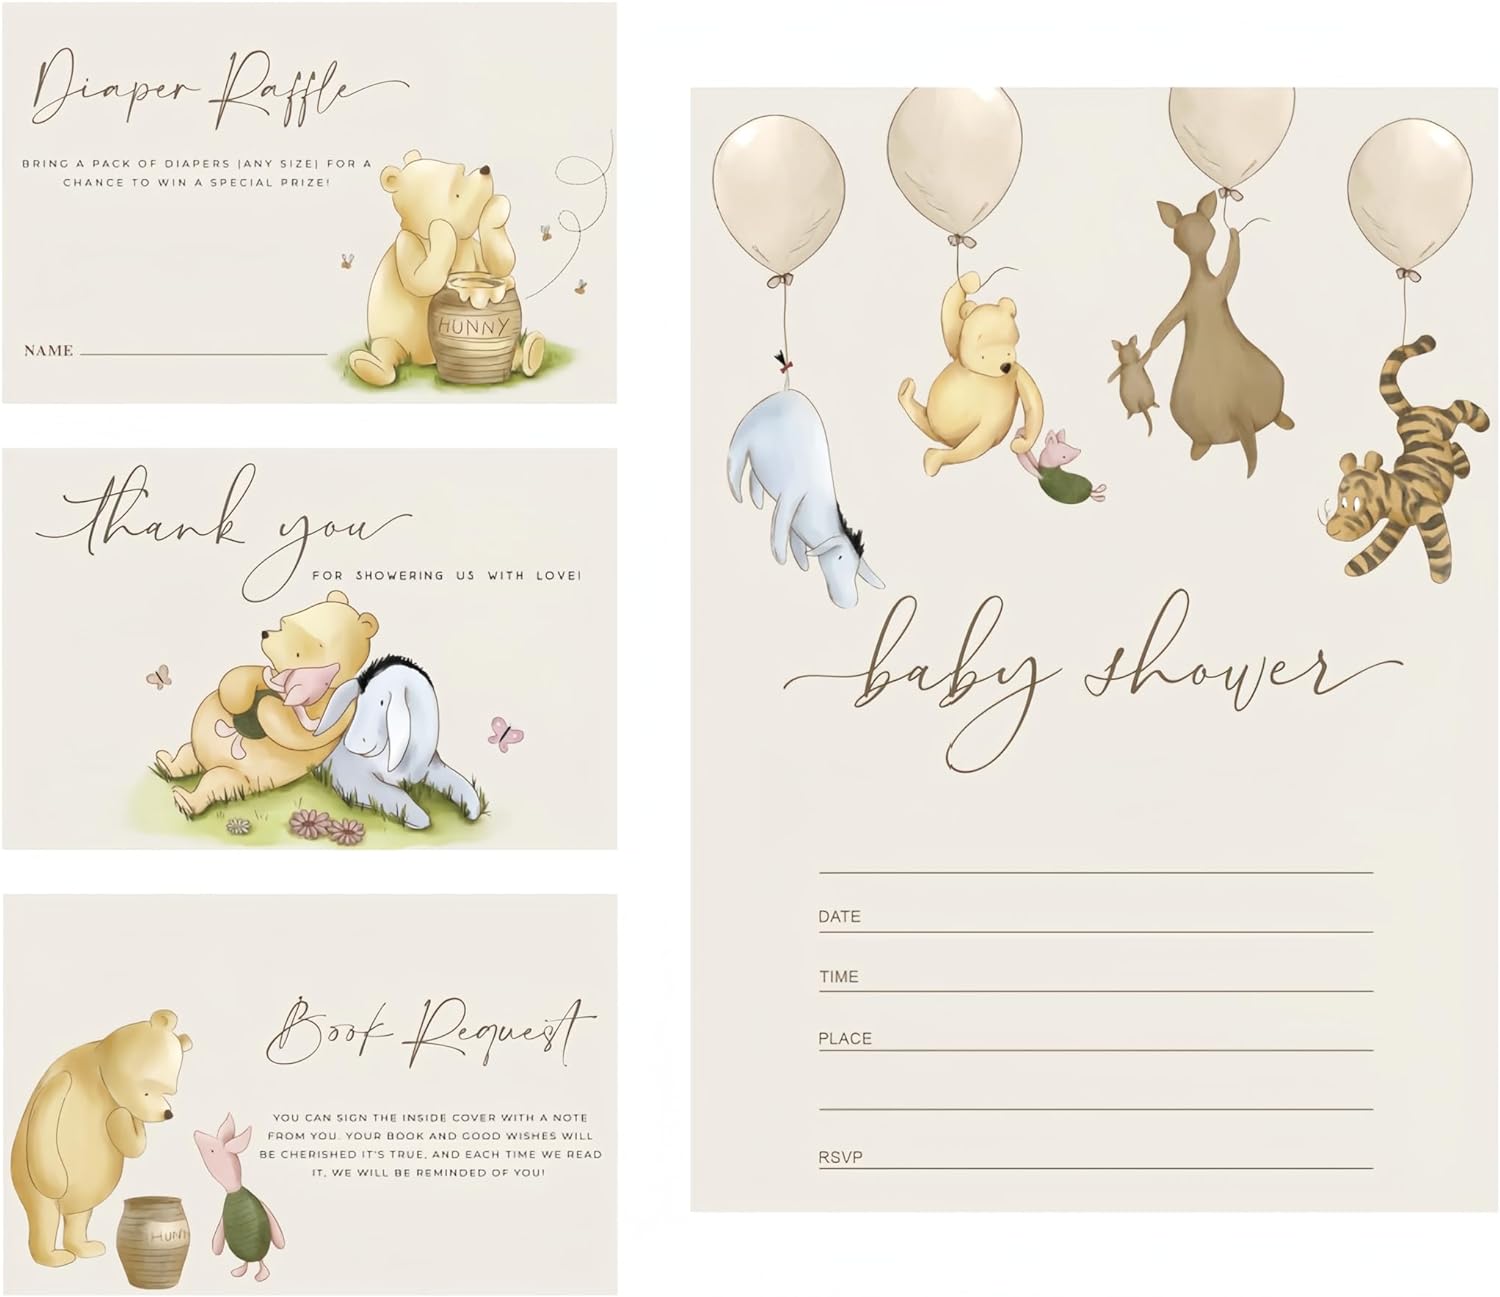 Top 15 Winnie the Pooh Baby Shower Invitations